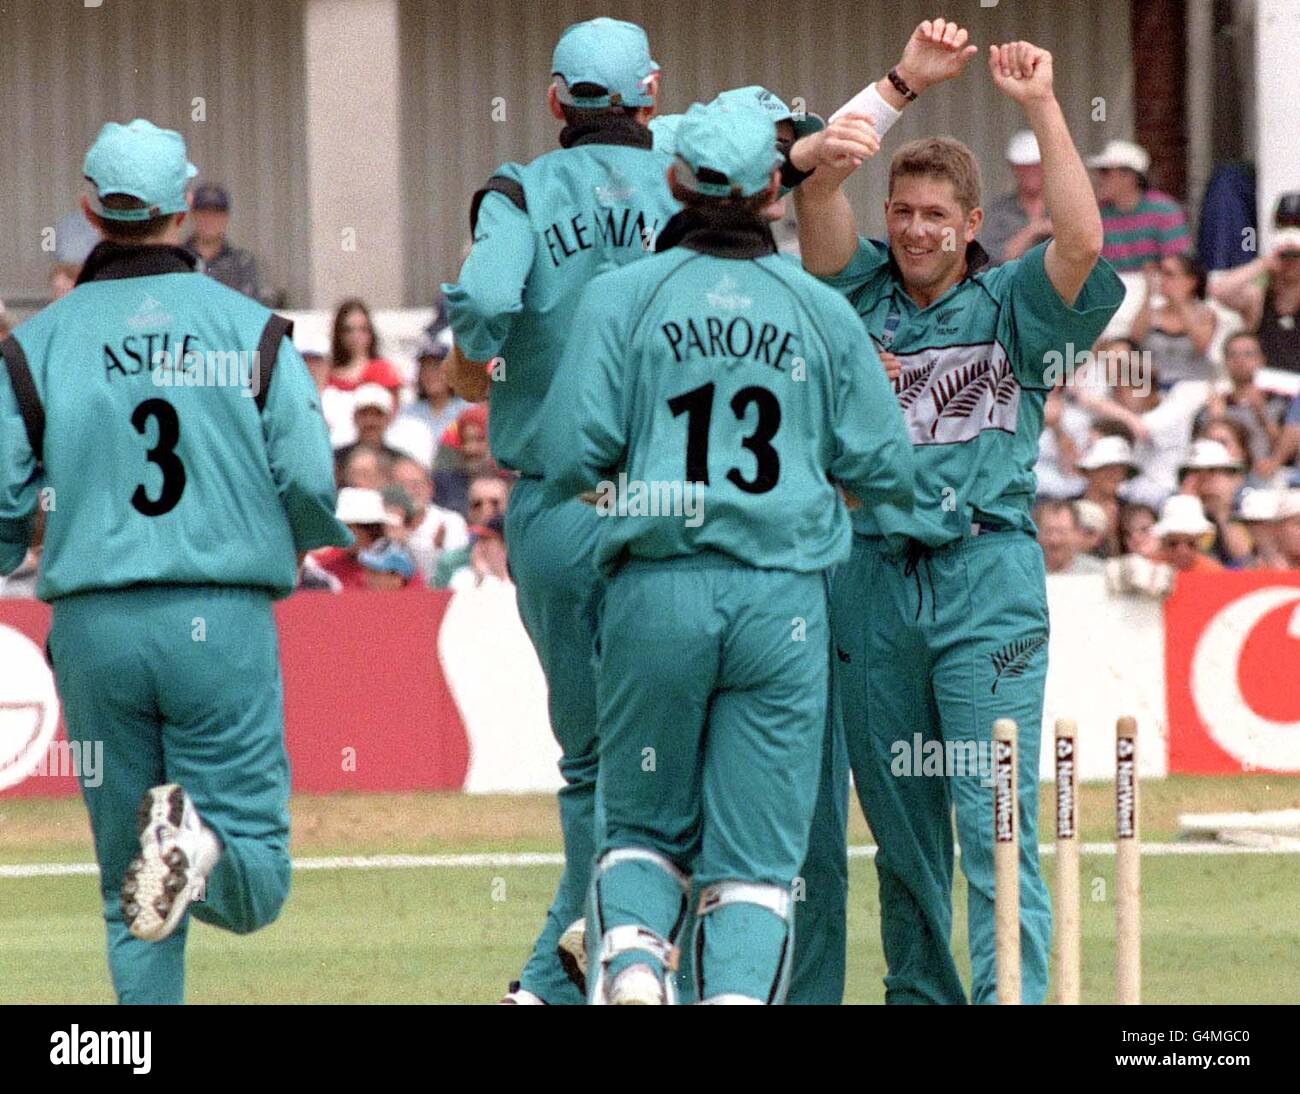 Geoff Allott of New Zealand (right) is congratulated by his team-mates after taking the wicket from Zimbabwe's Neil Johnson, in the Super Six Cricket World Cup Match at Headingley, Leeds. Stock Photo